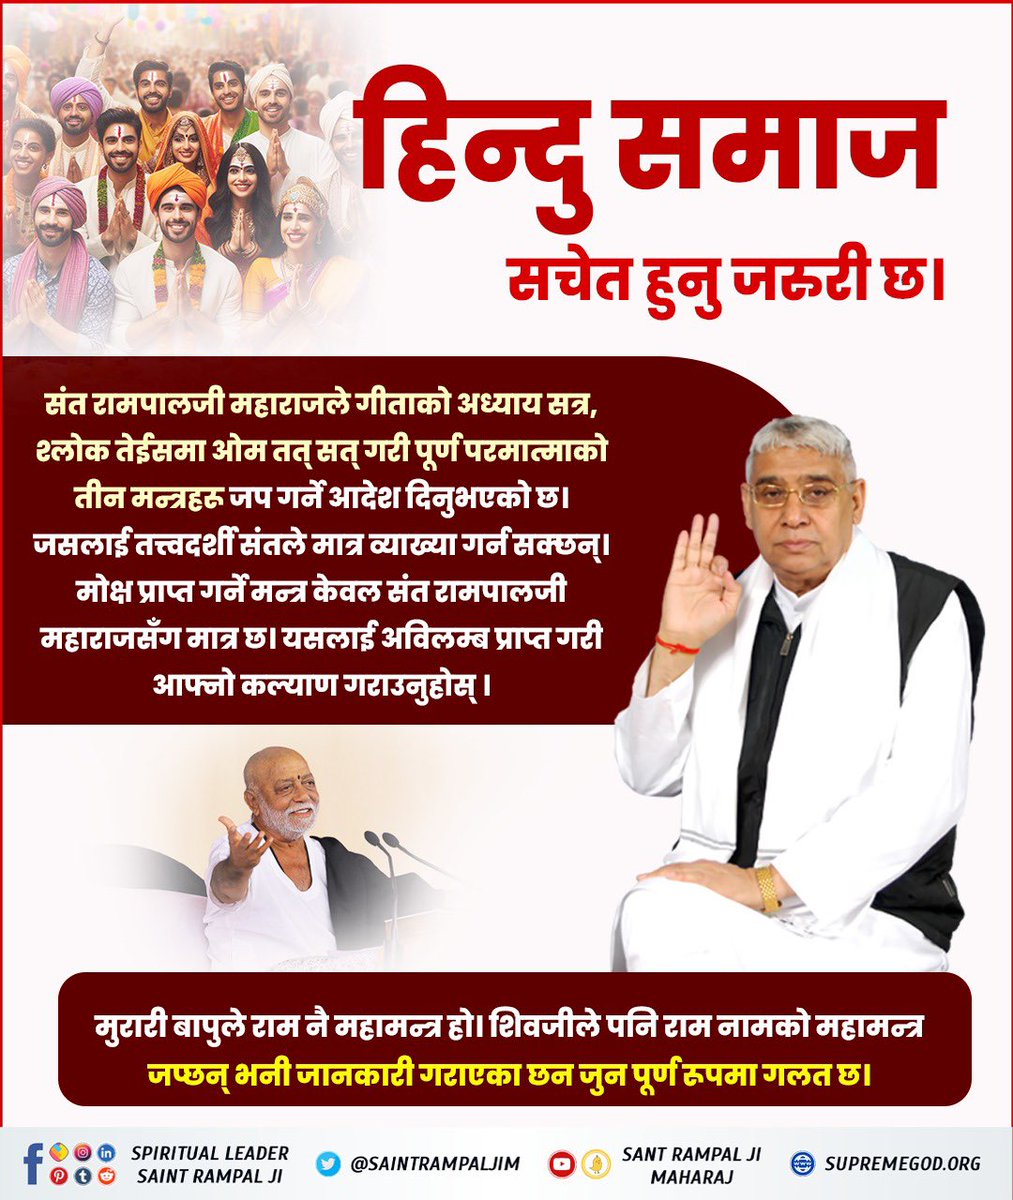 #आउनुहोस्_सनातनलाई_जानौँ
Hindu society needs to be aware.
 Sant Rampal Ji Maharaj has ordered the chanting of the three mantras of the Supreme Lord, Om Tat Sat, in Adhyay 17, Shlok 23 of the Gita.  Which can only be explained by a philosopher Tatvadarshi saint.